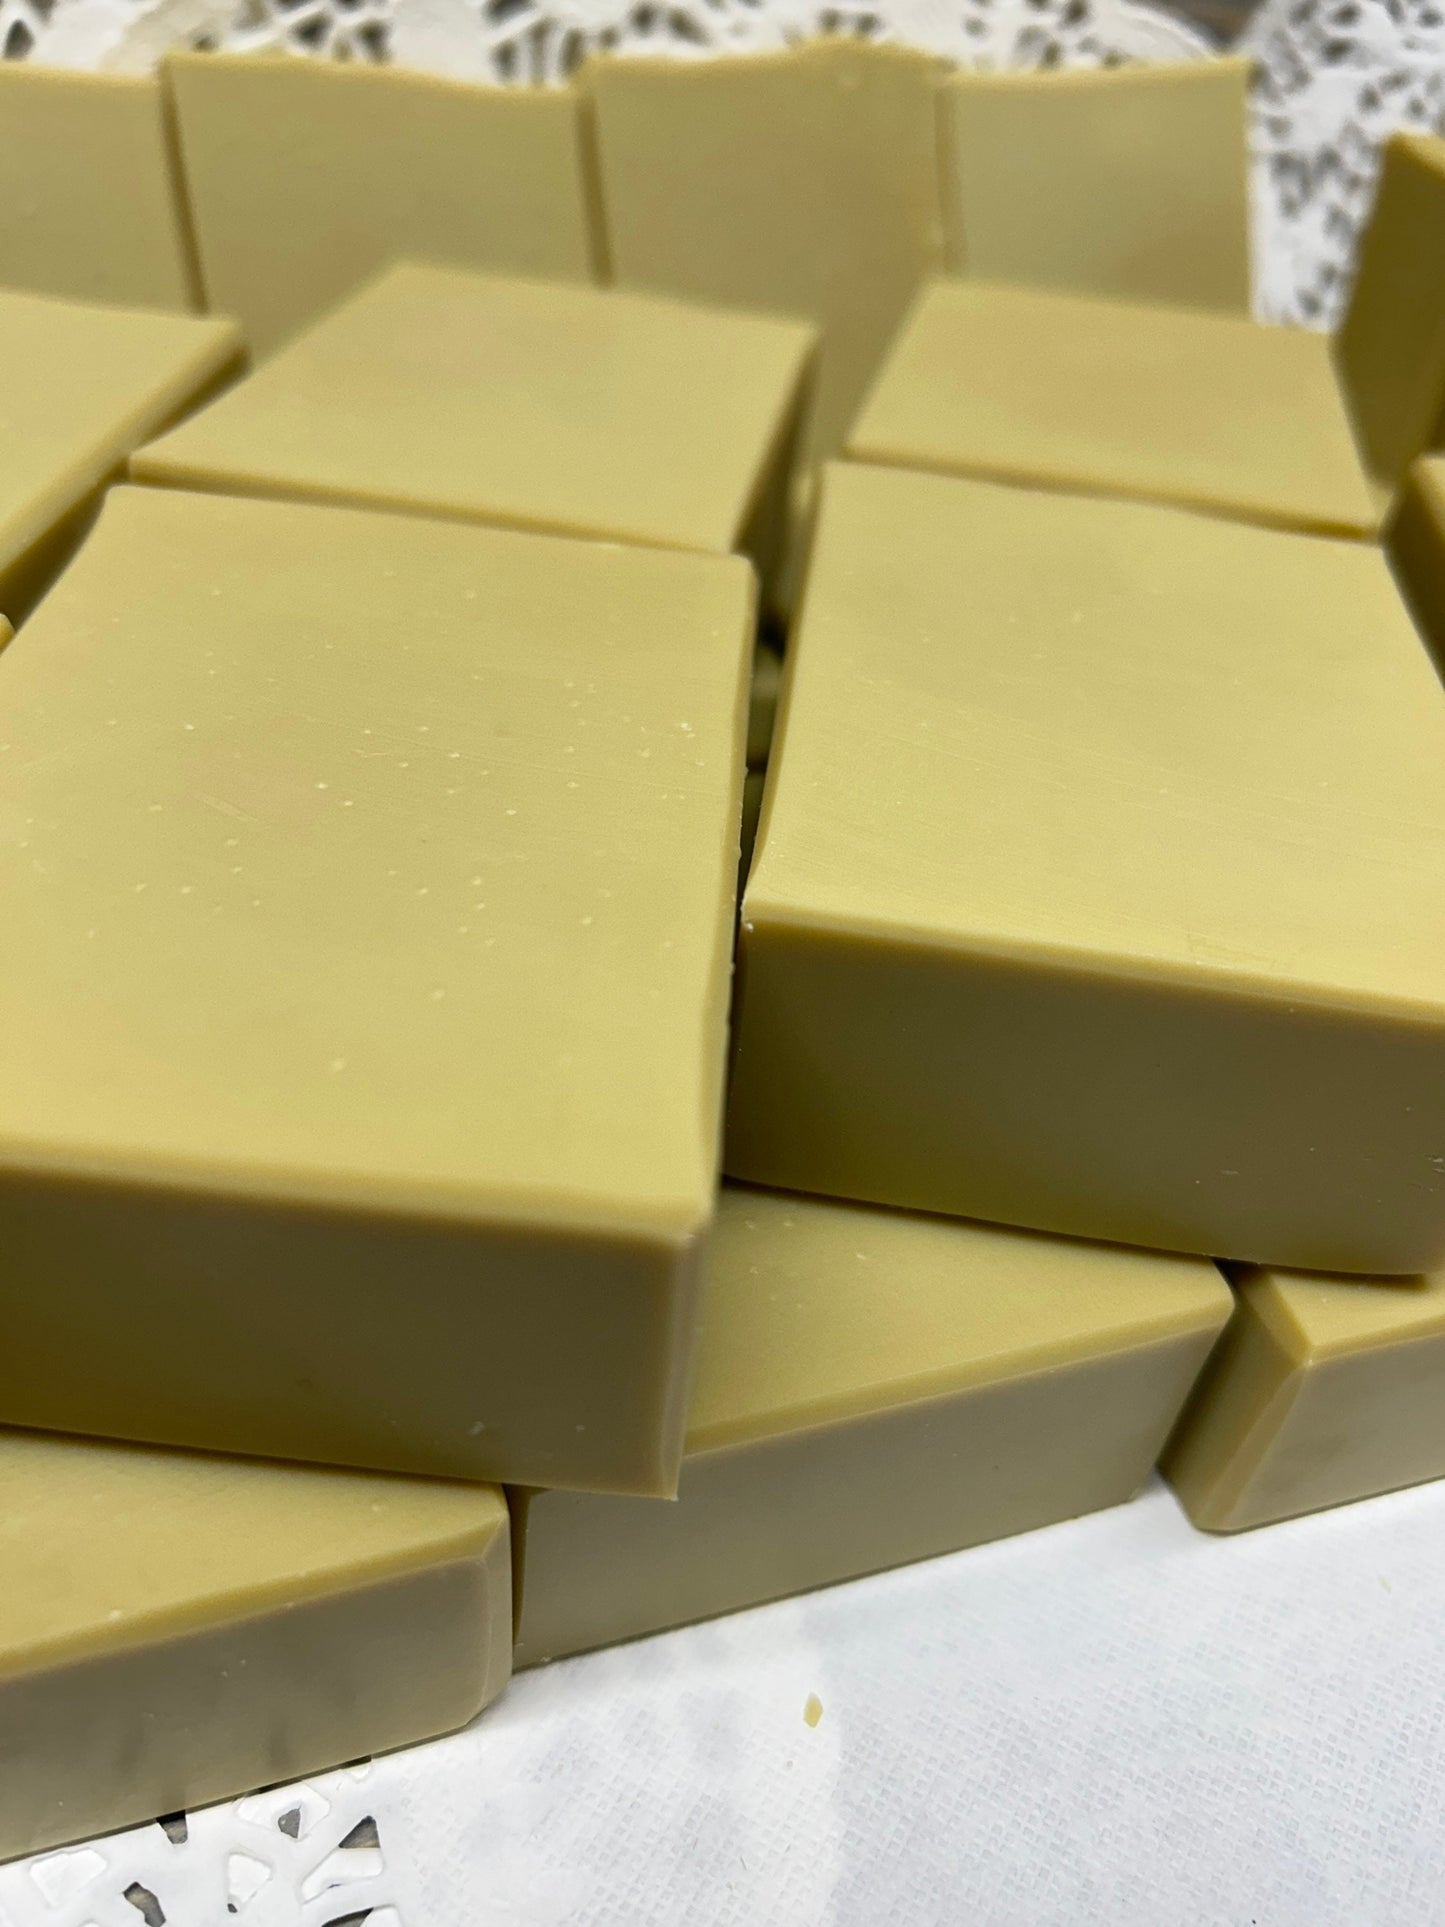 Aleppo Soap made with Laurel Fruit Oil at 40% and Extra Virgin Olive Oil, so smooth and creamy